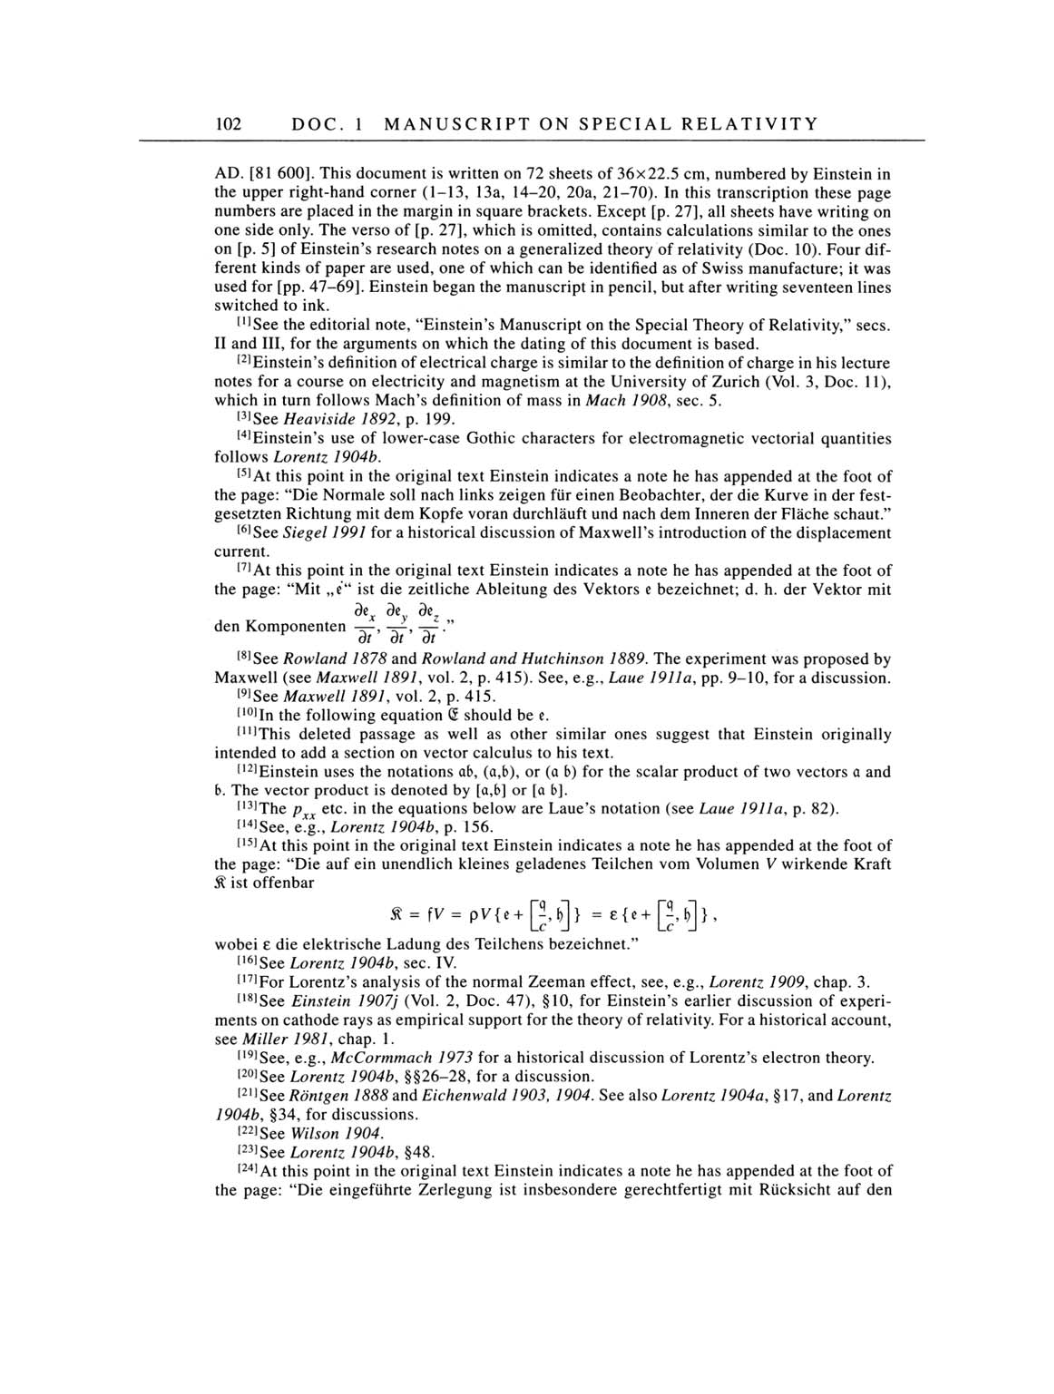 Volume 4: The Swiss Years: Writings 1912-1914 page 102